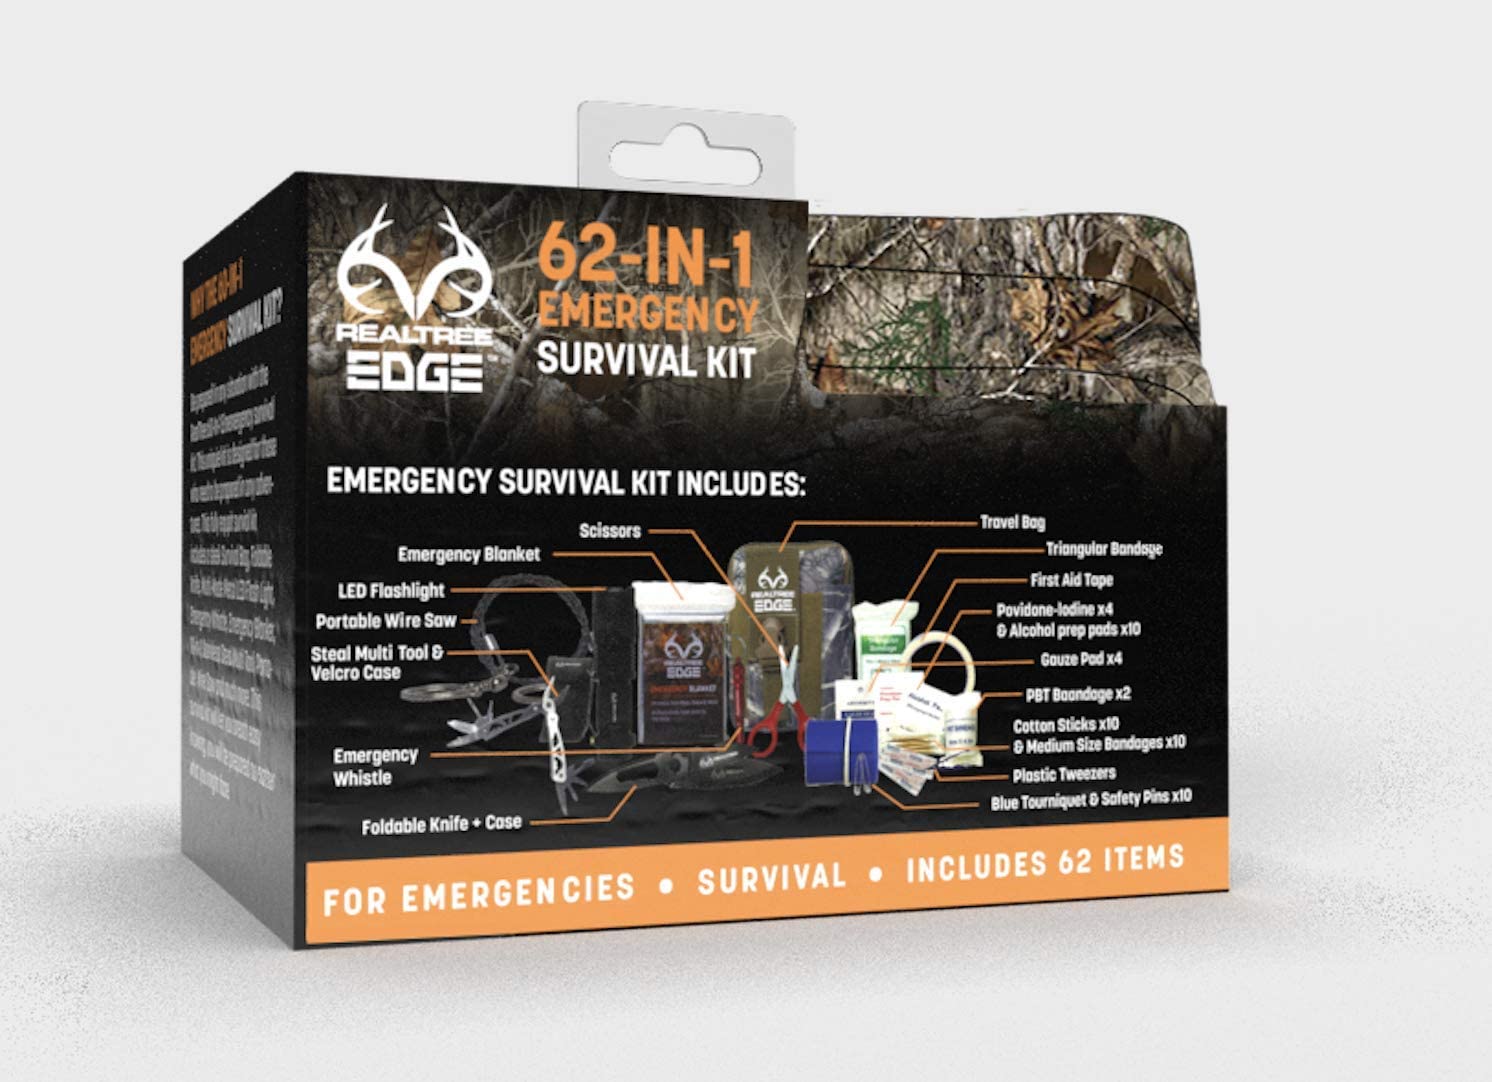 Realtree 62-in-1 Emergency Survival and Medical Kit – Survival First Aid Kit and Outdoor Survival Kit with Survival Bag, Foldable Knife, Multi-Mode Metal LED Flashlight, Medical Supplies, and More